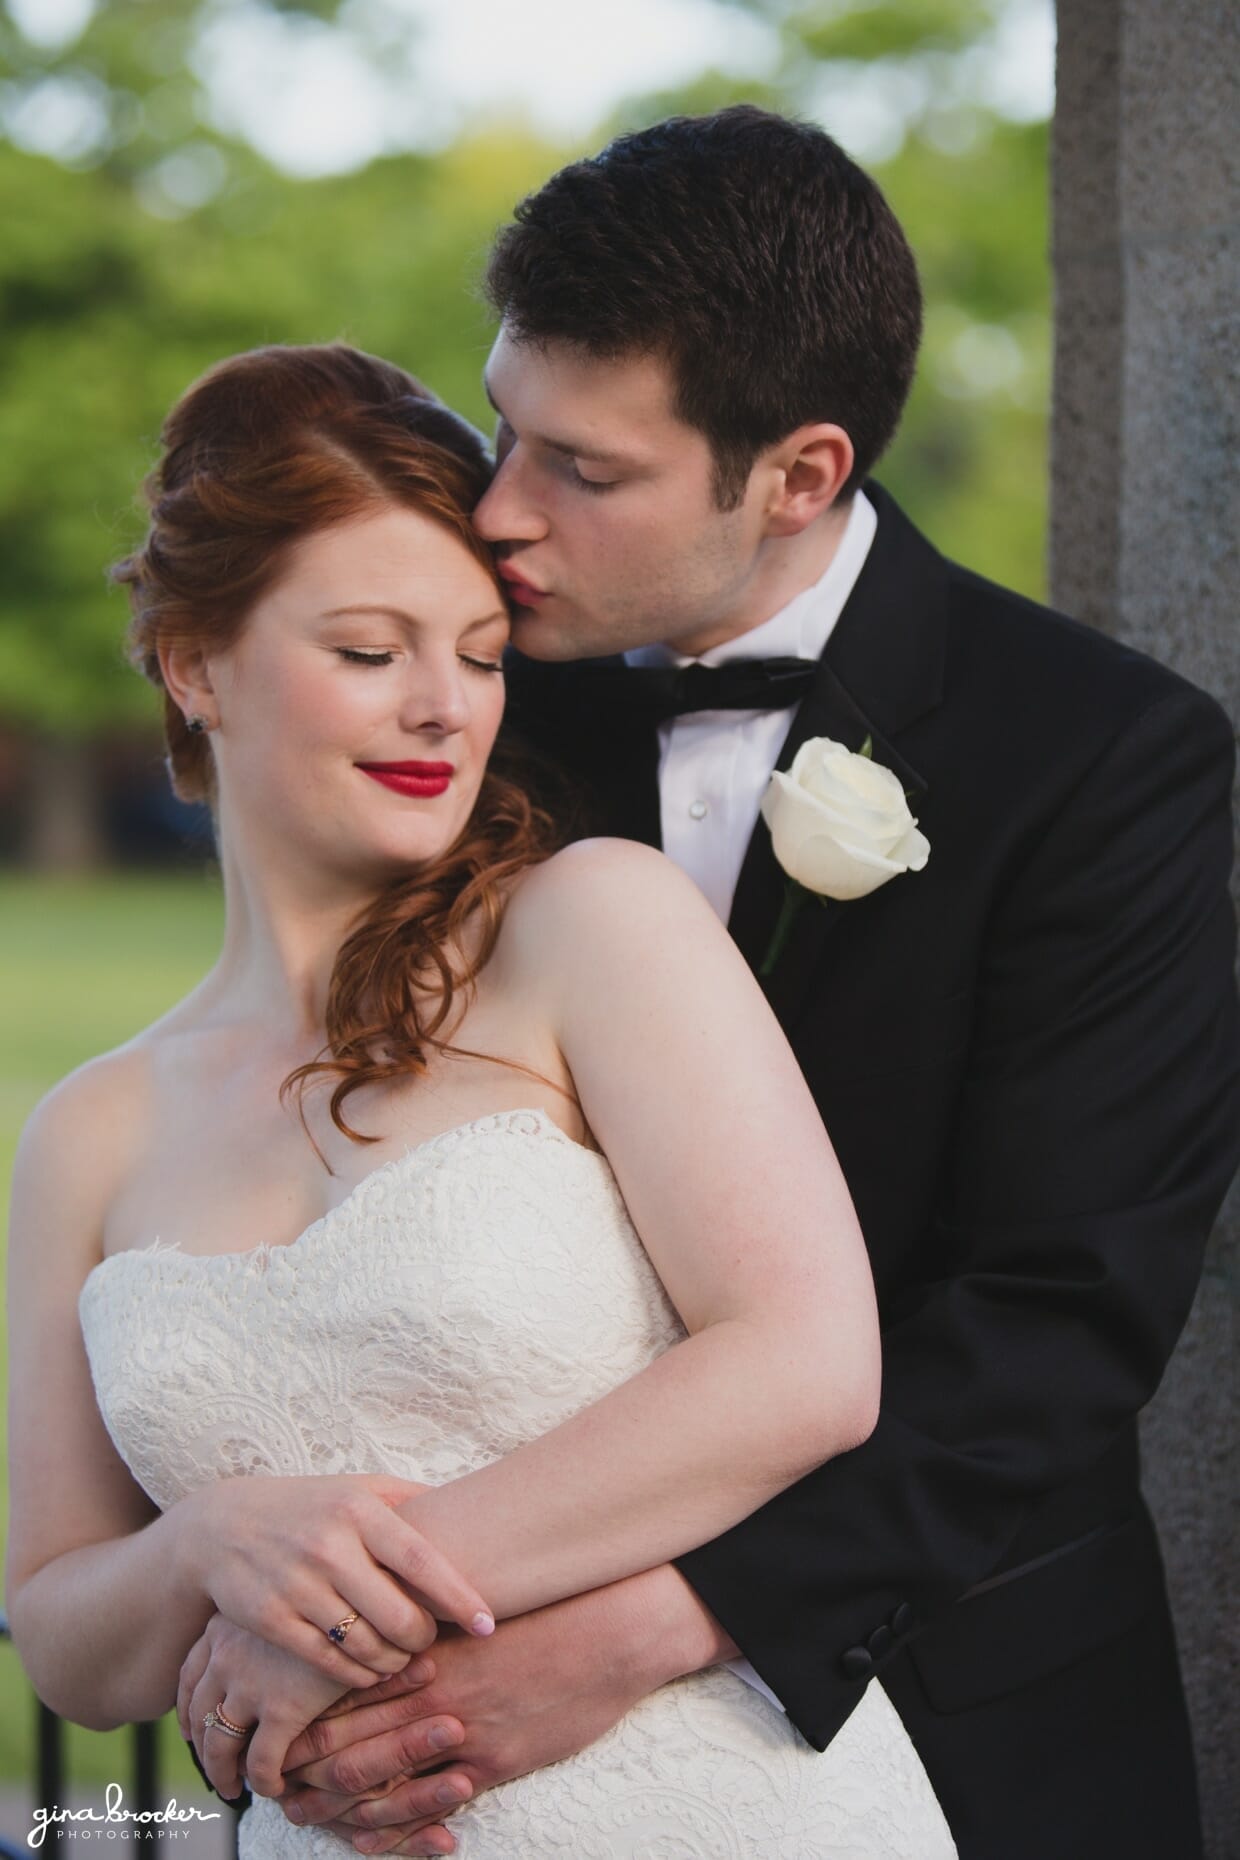 A sweet portrait of a groom kissing his vintage inspired bride at their wedding in Salem, Massachusetts